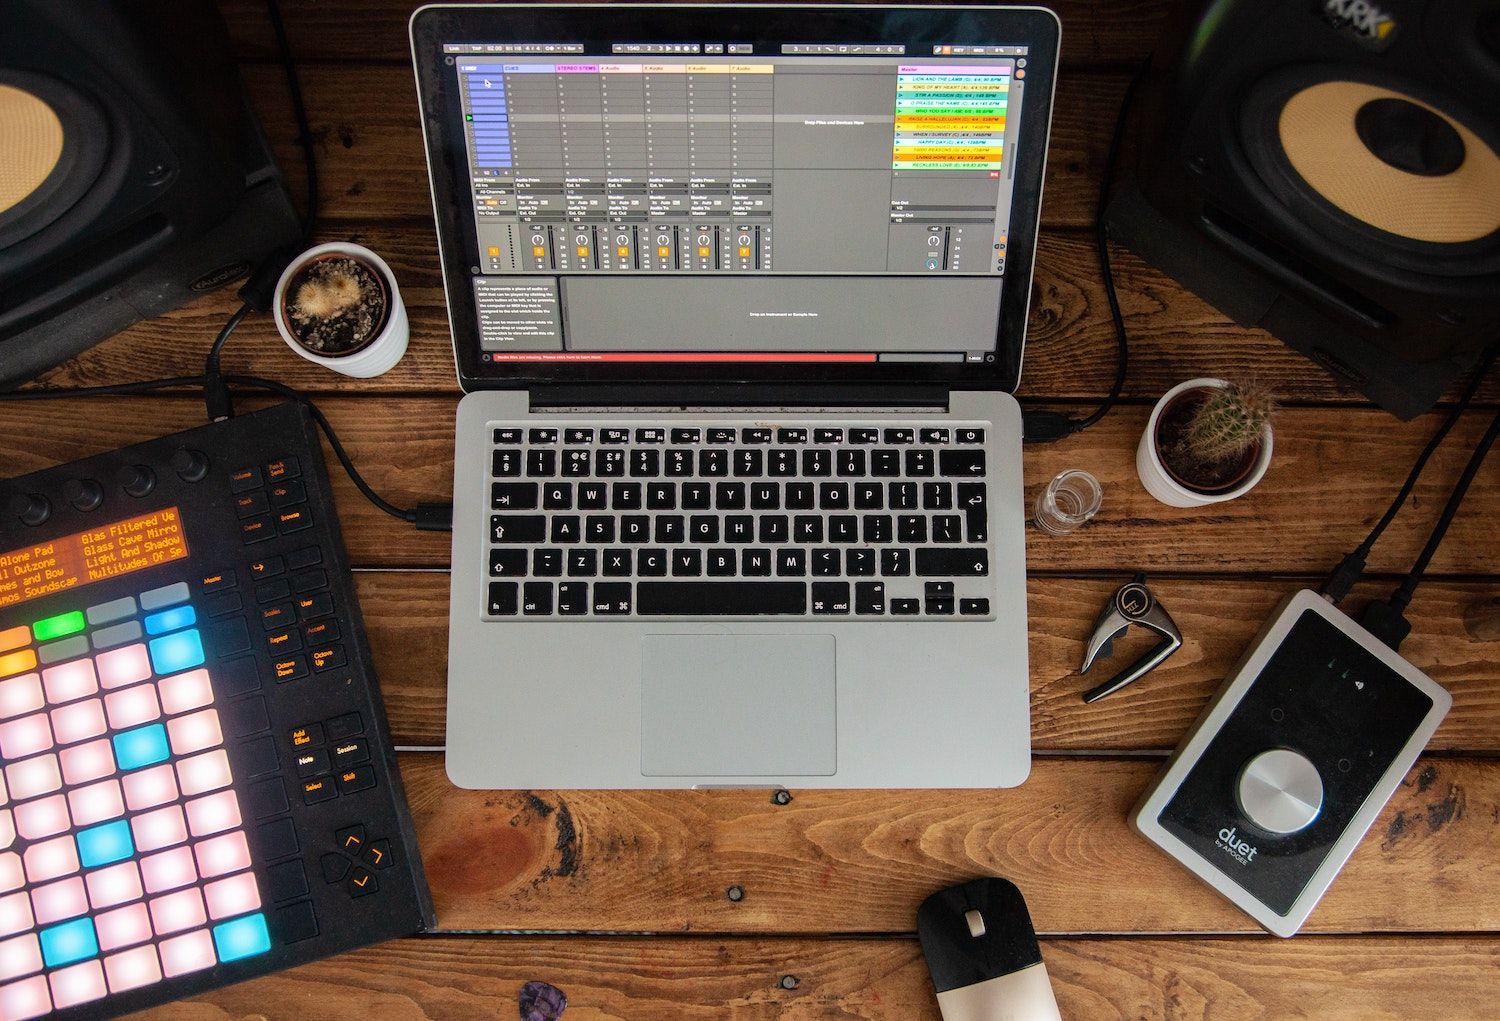 A photo of a Macbook device on a desk, with the Ableton Live DAW open, together with an Ableton Push and Audio Interface